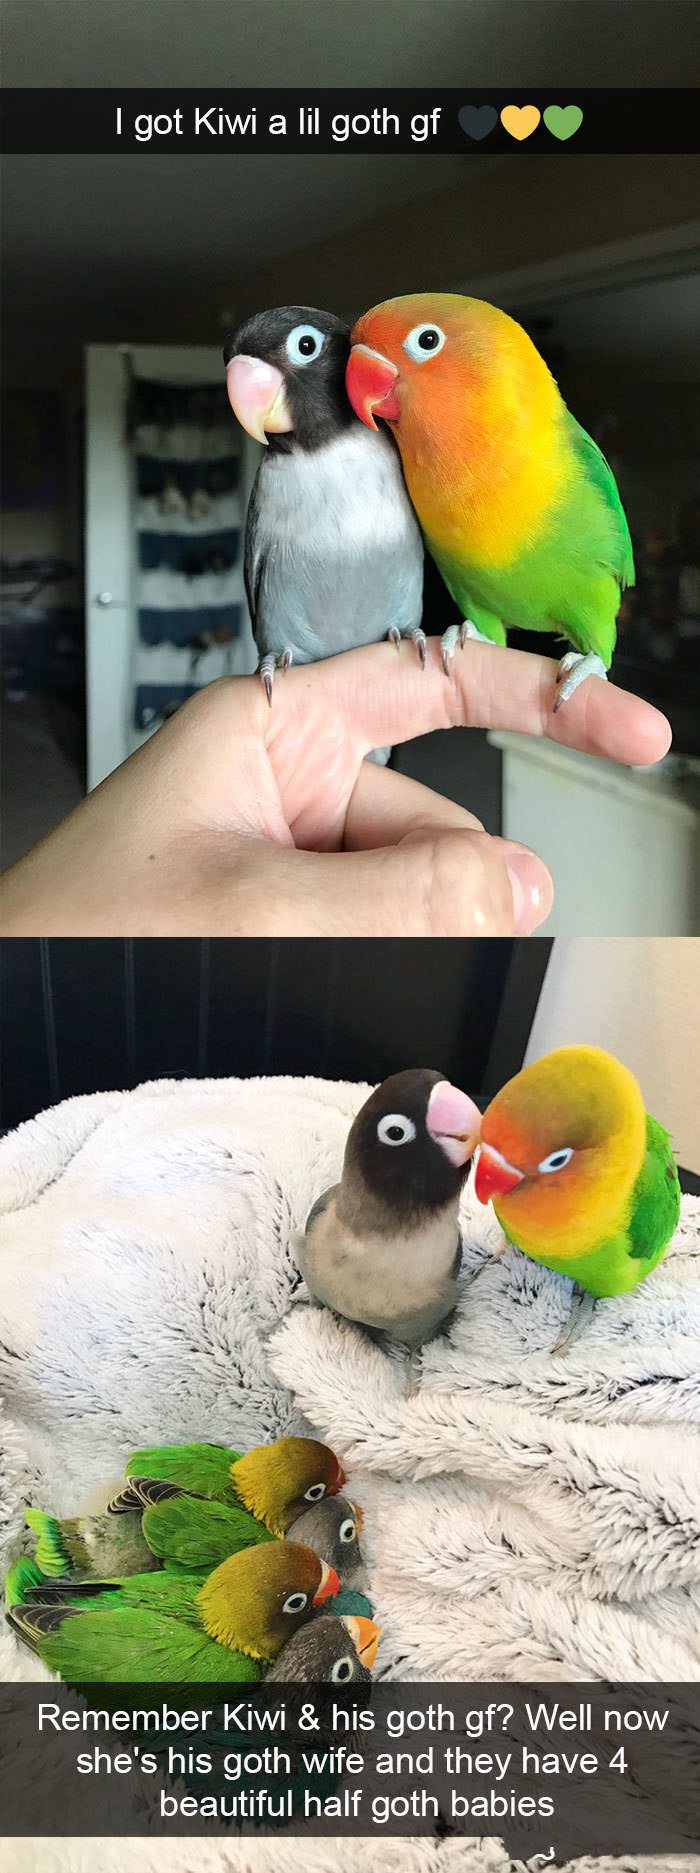 Funniest Birds Snapchats that will Take You Under Their Wing of Humor